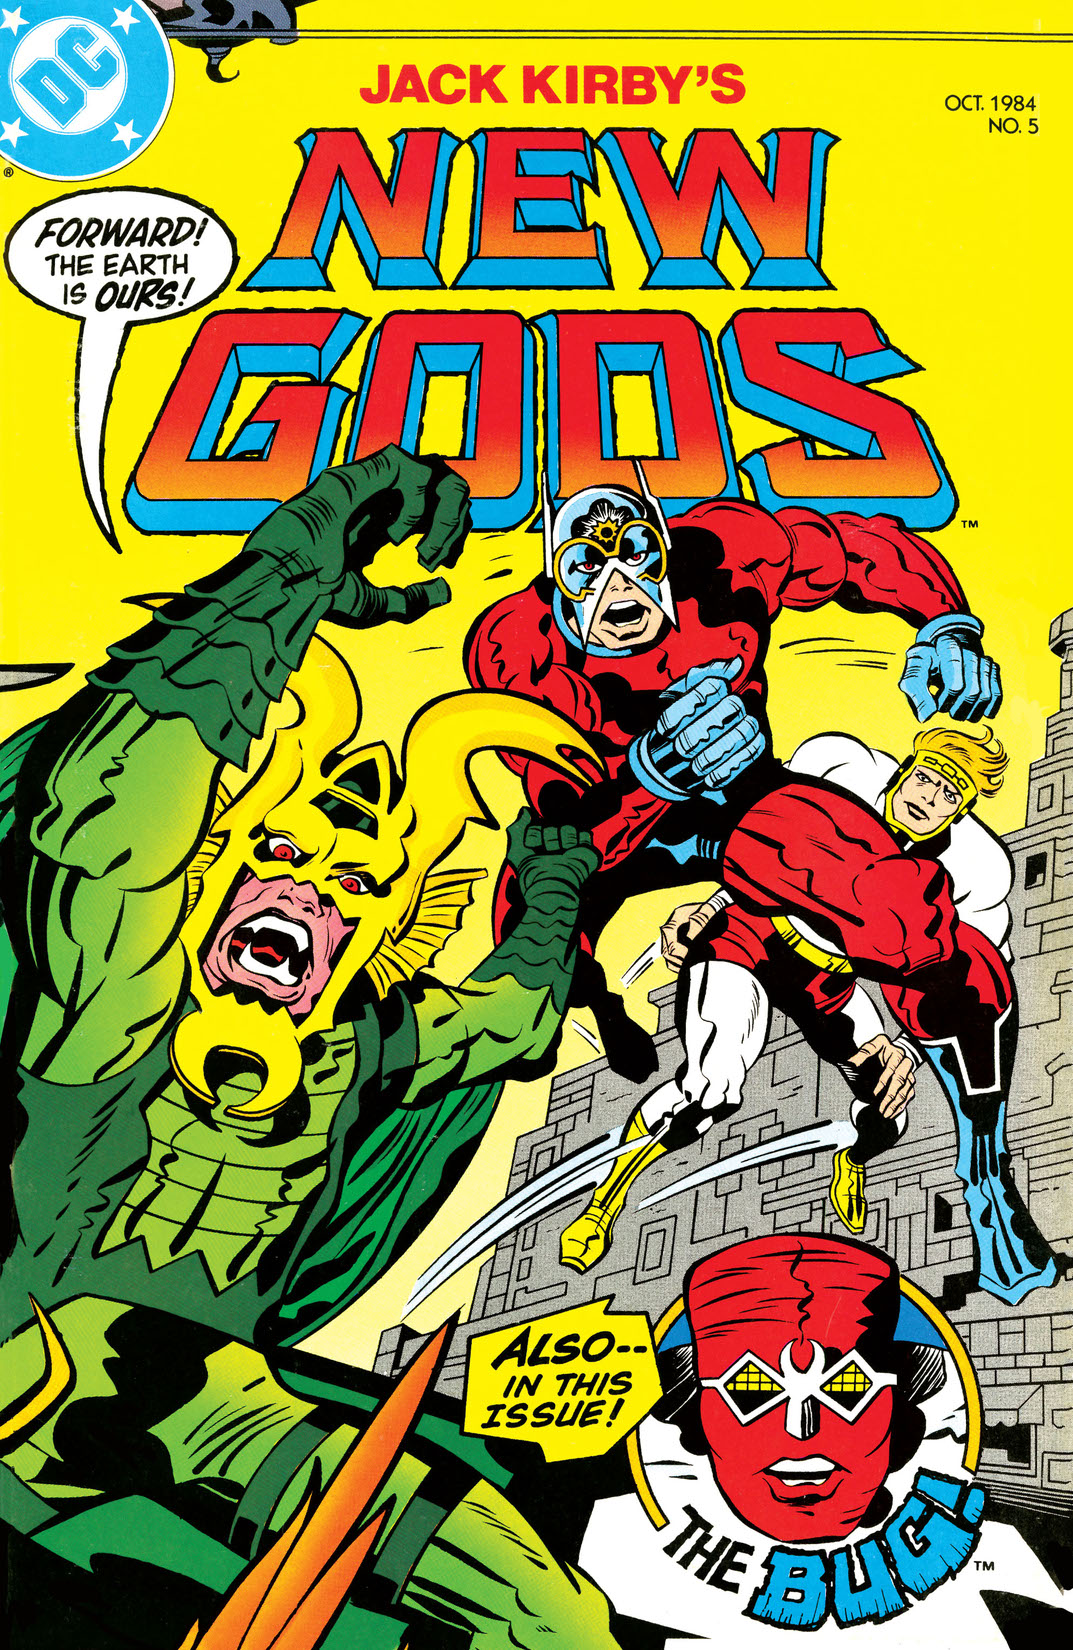 New Gods (1984-) #5 preview images